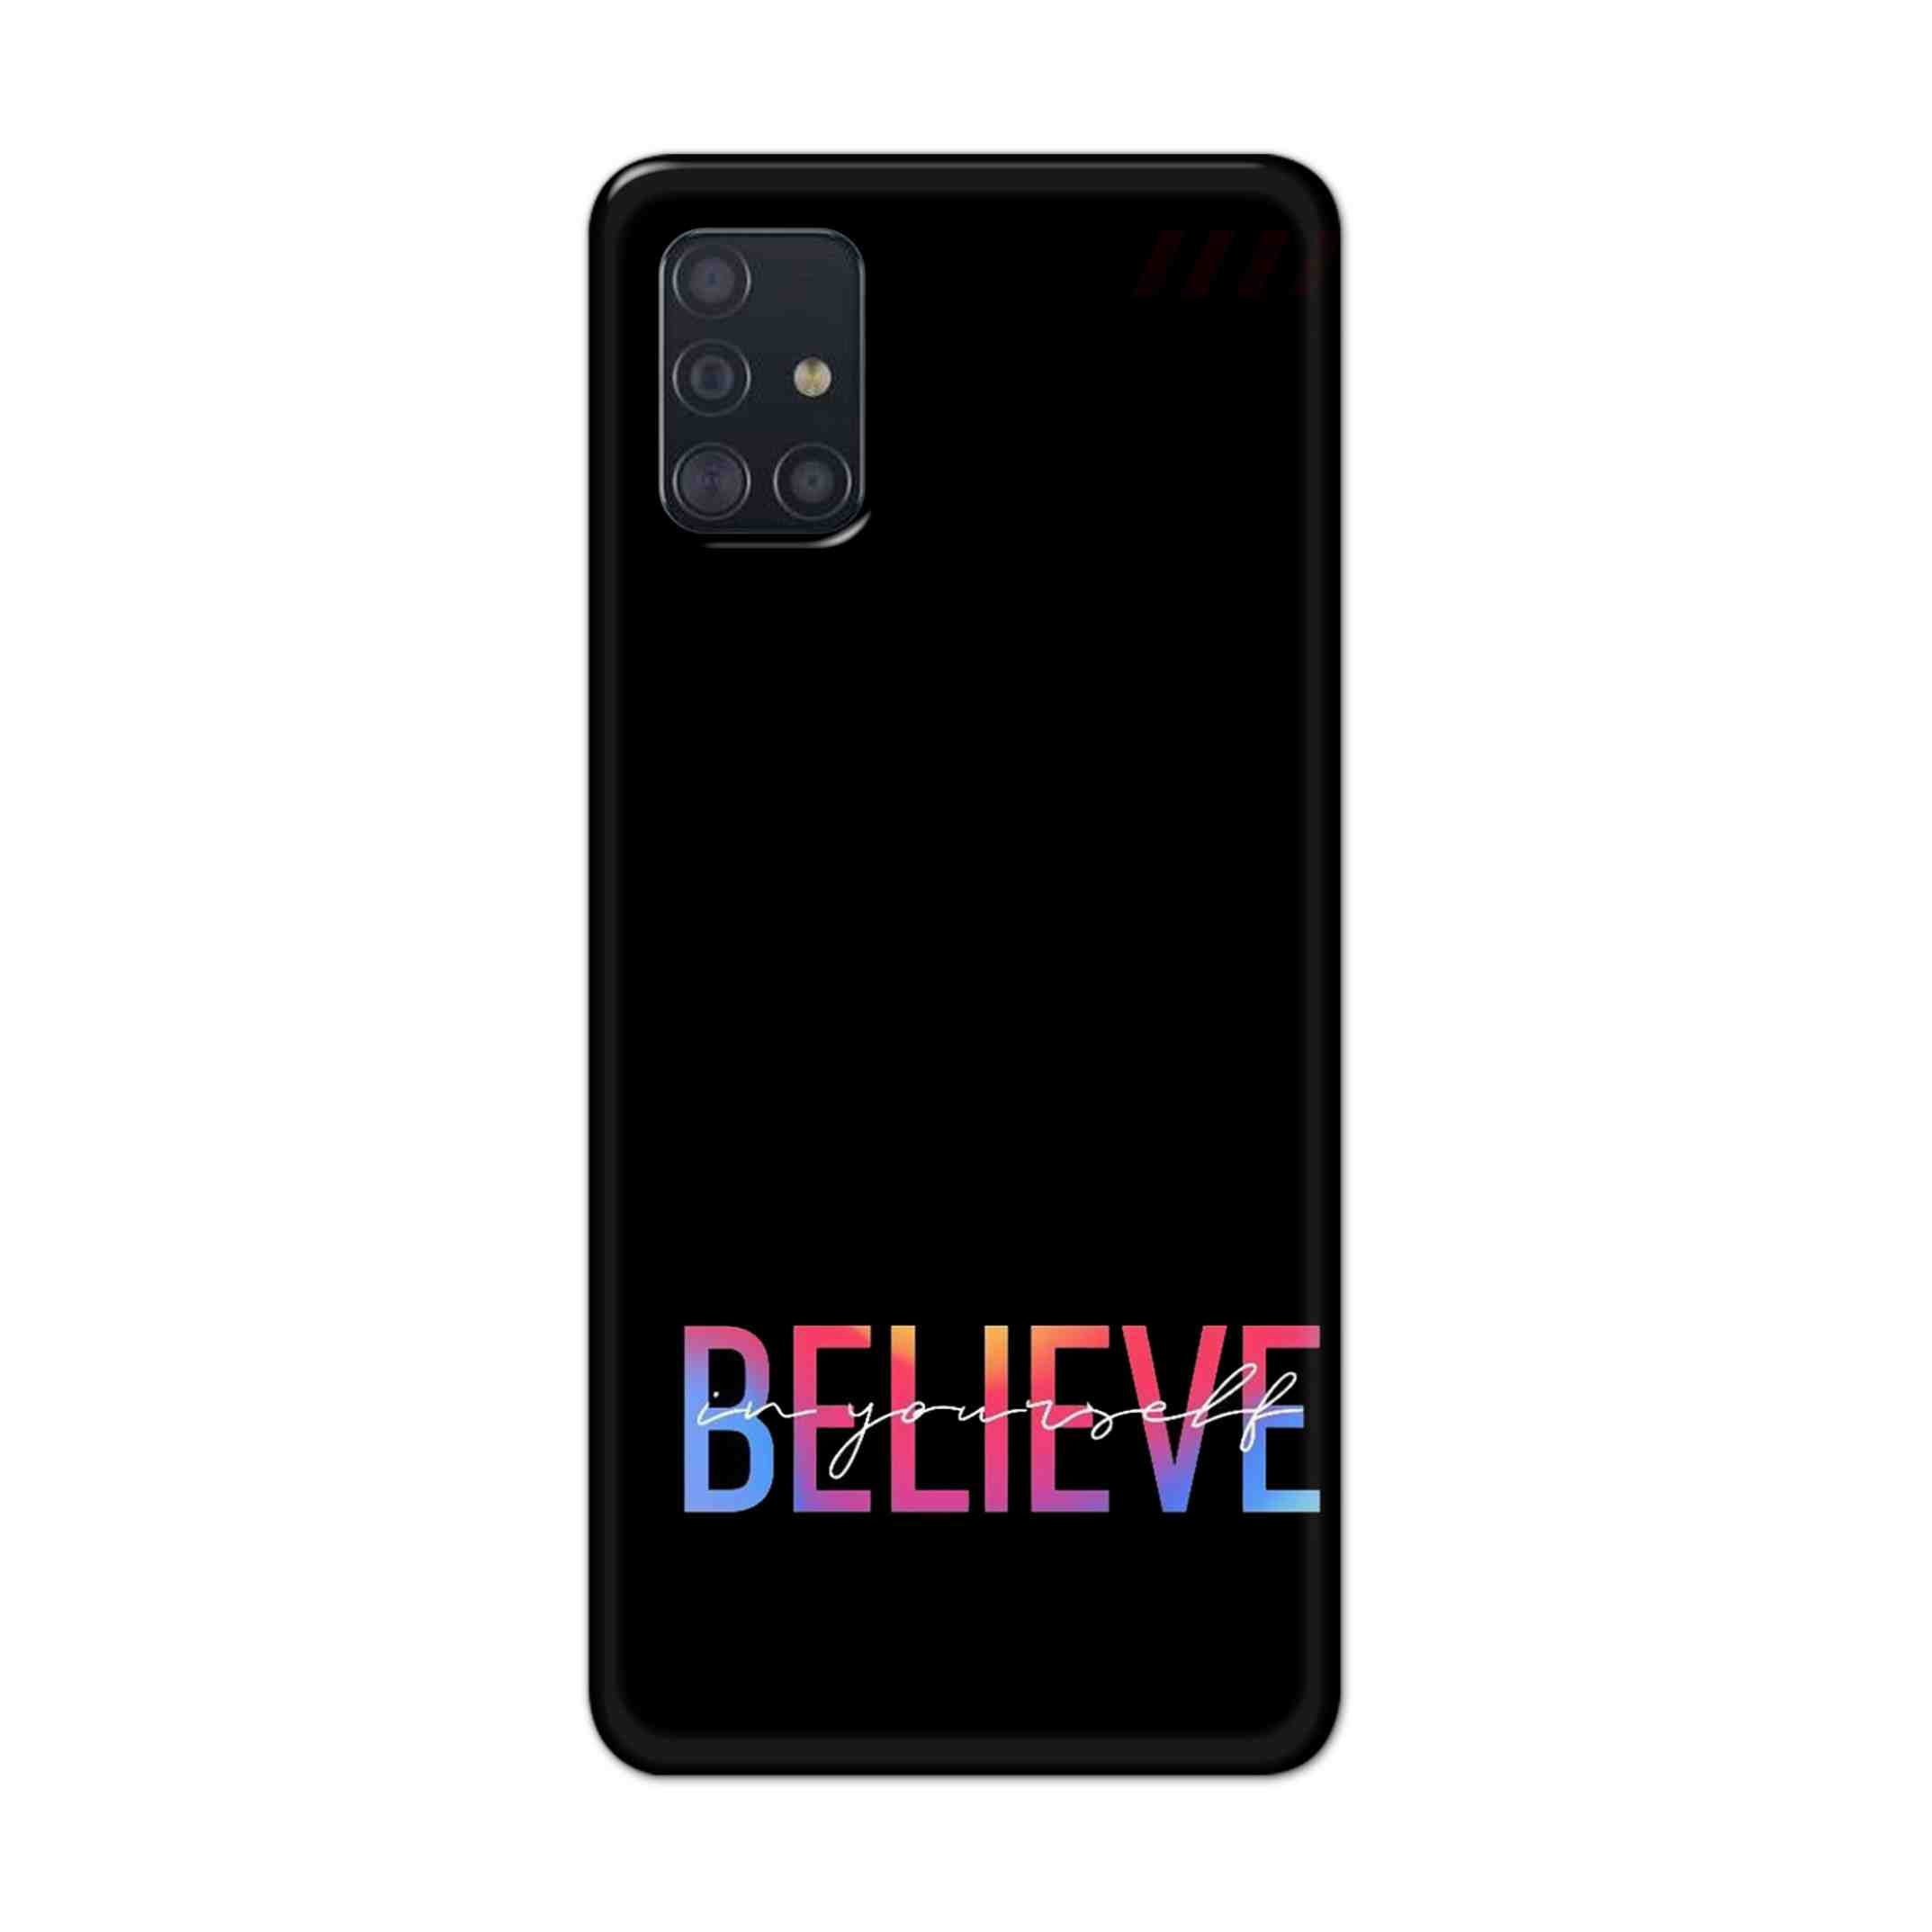 Buy Believe Hard Back Mobile Phone Case Cover For Samsung Galaxy M31s Online